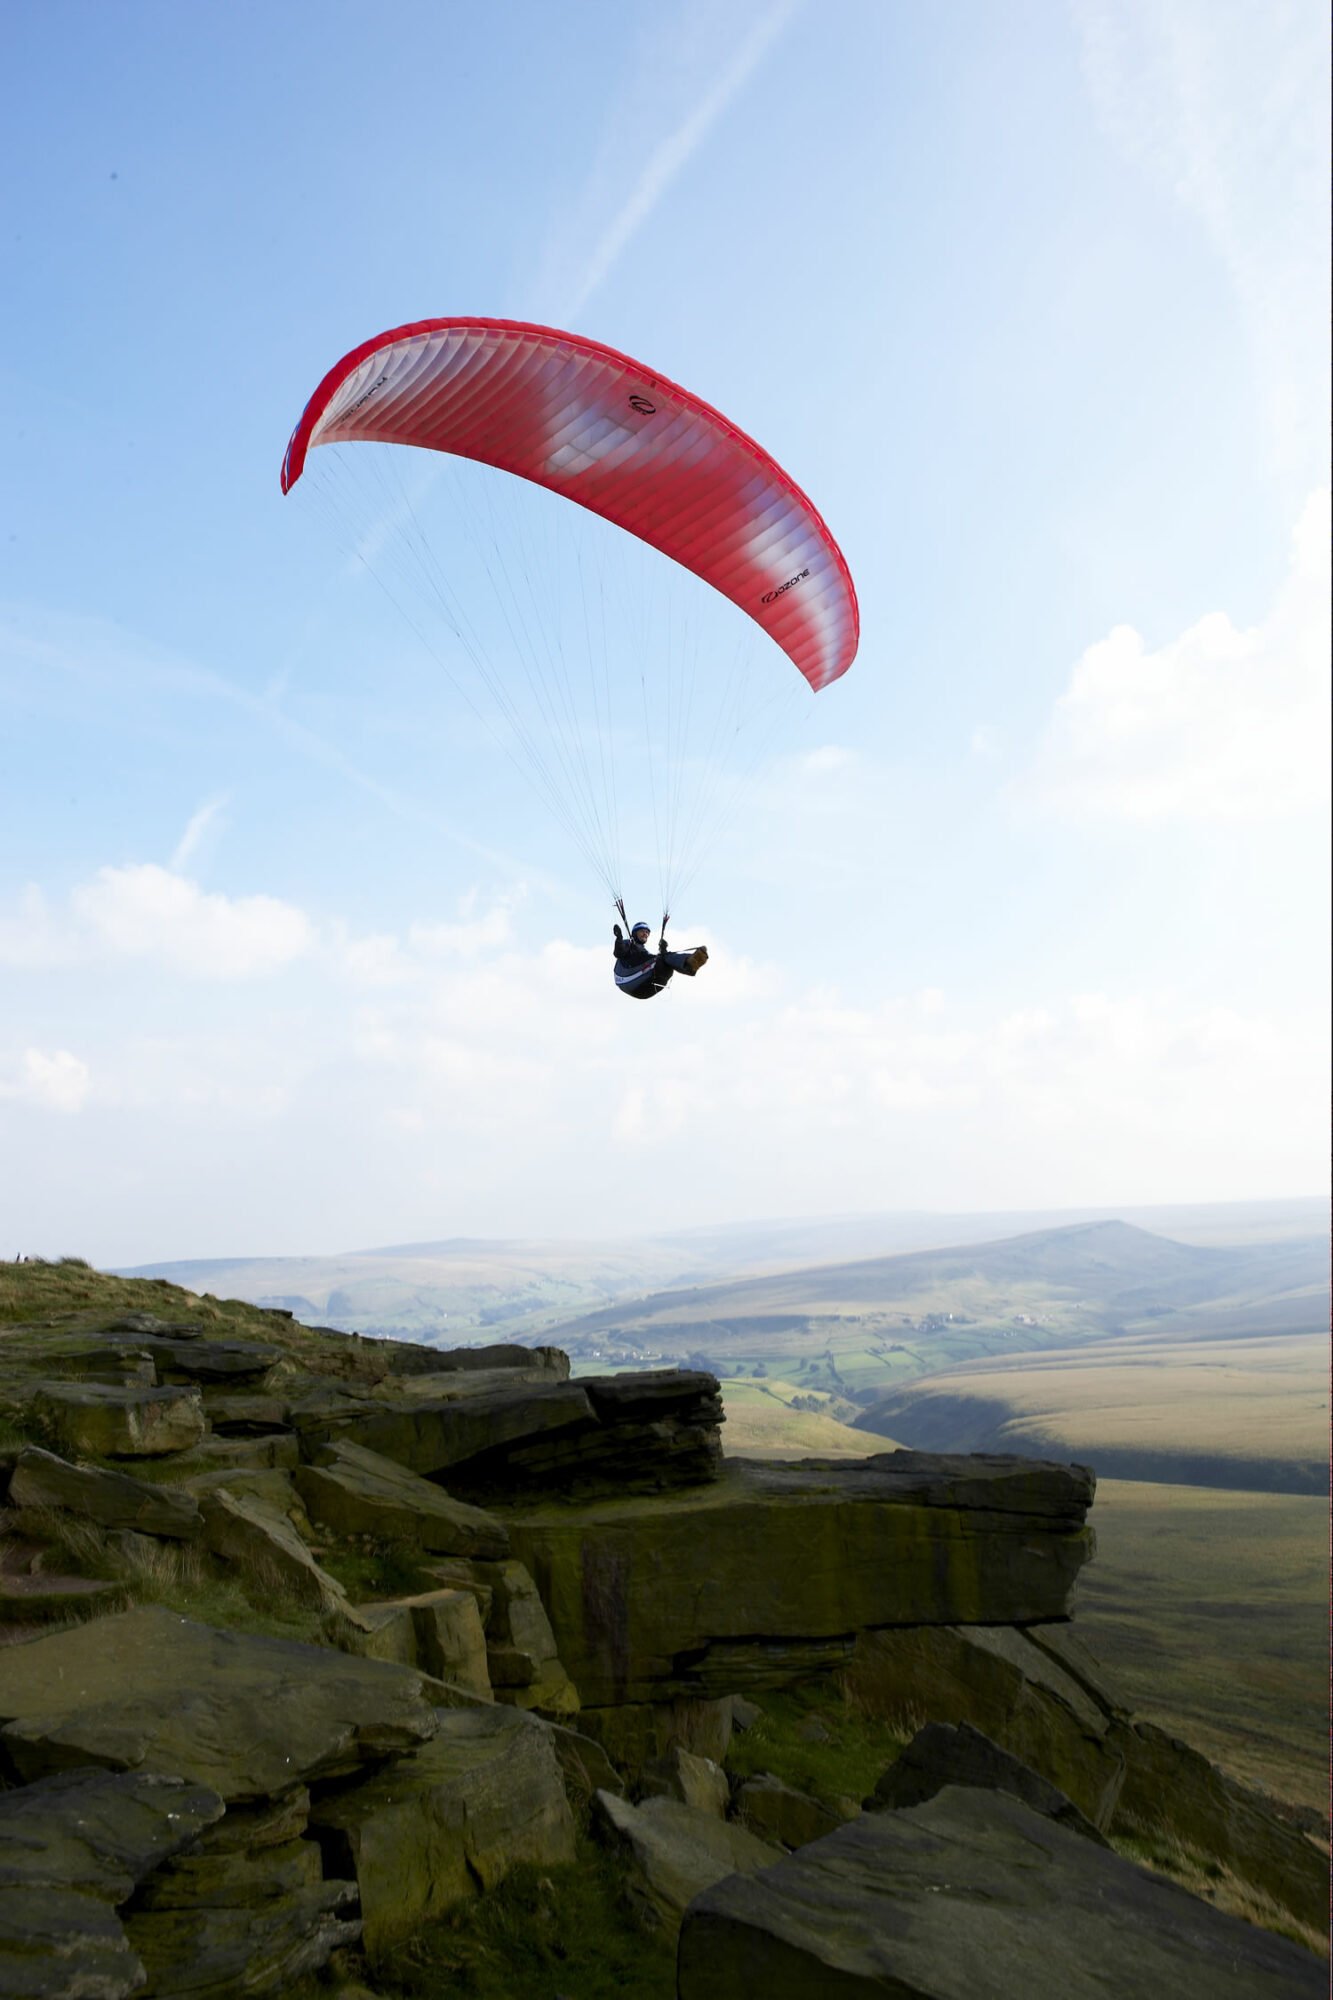 Image name marsden 2 the 13 image from the post Flying High in Yorkshire.com.